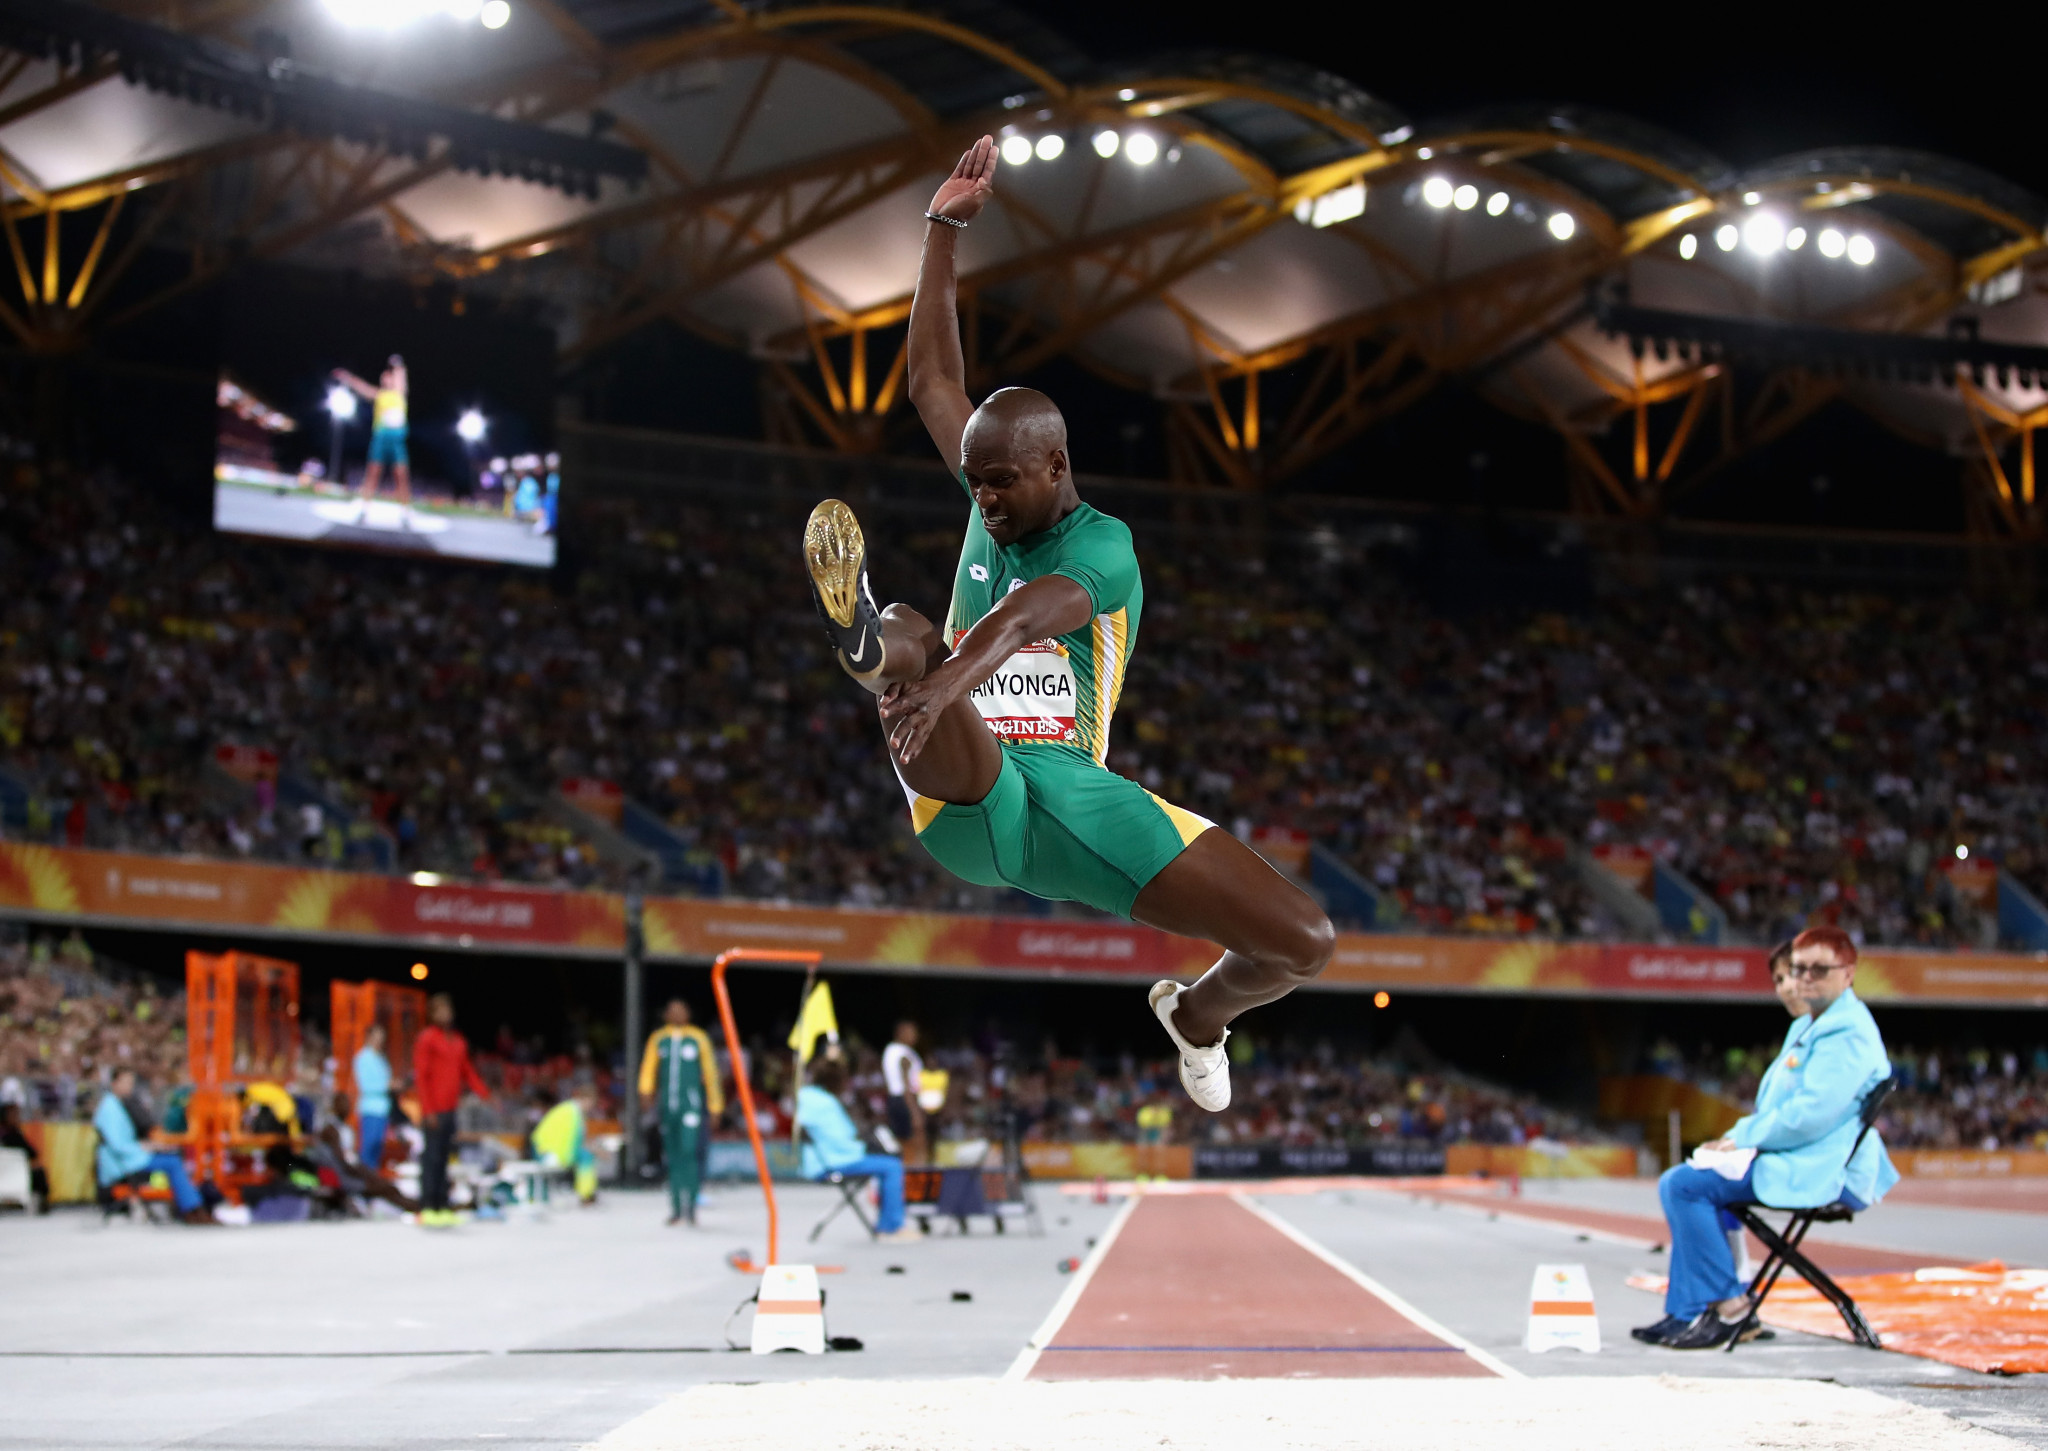 Commonwealth Games records fall as athletics action continues at Gold Coast 2018